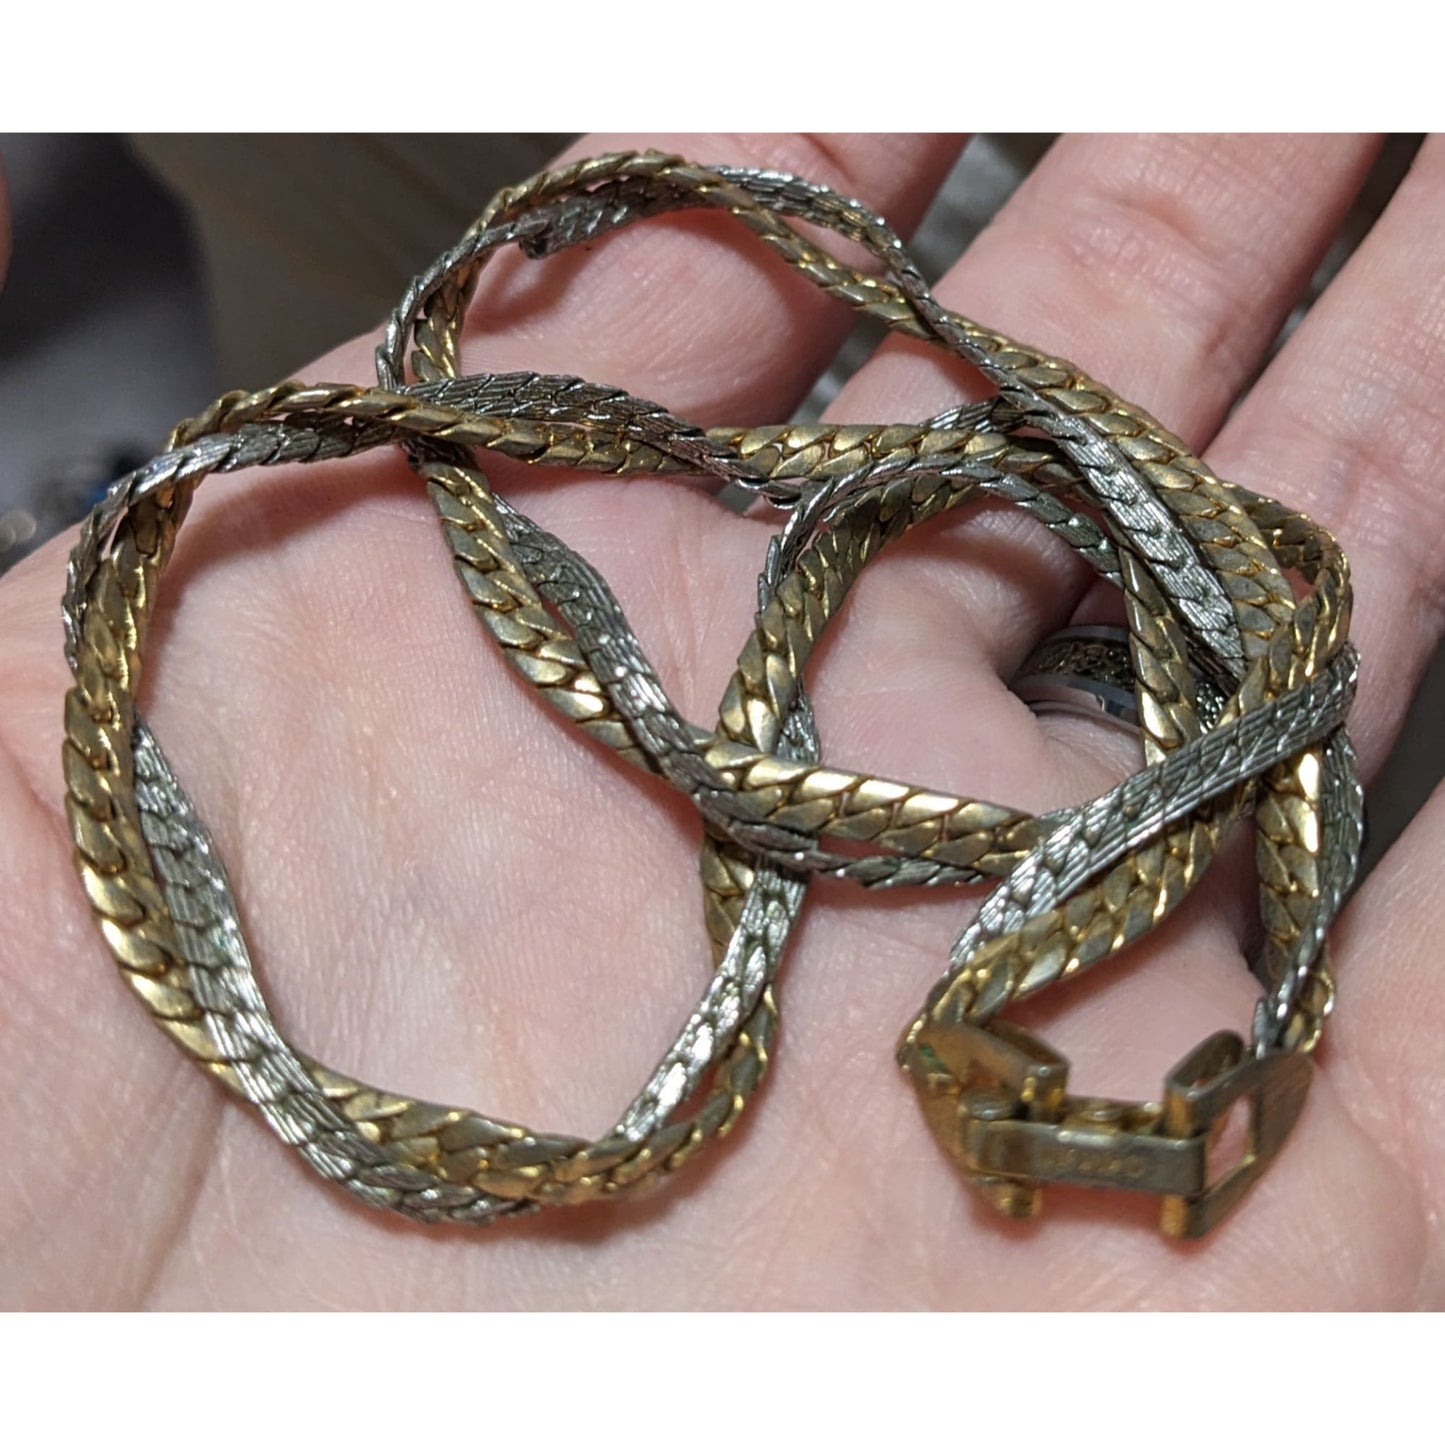 1970s Avon Interweave Gold And Silver Chain Necklace